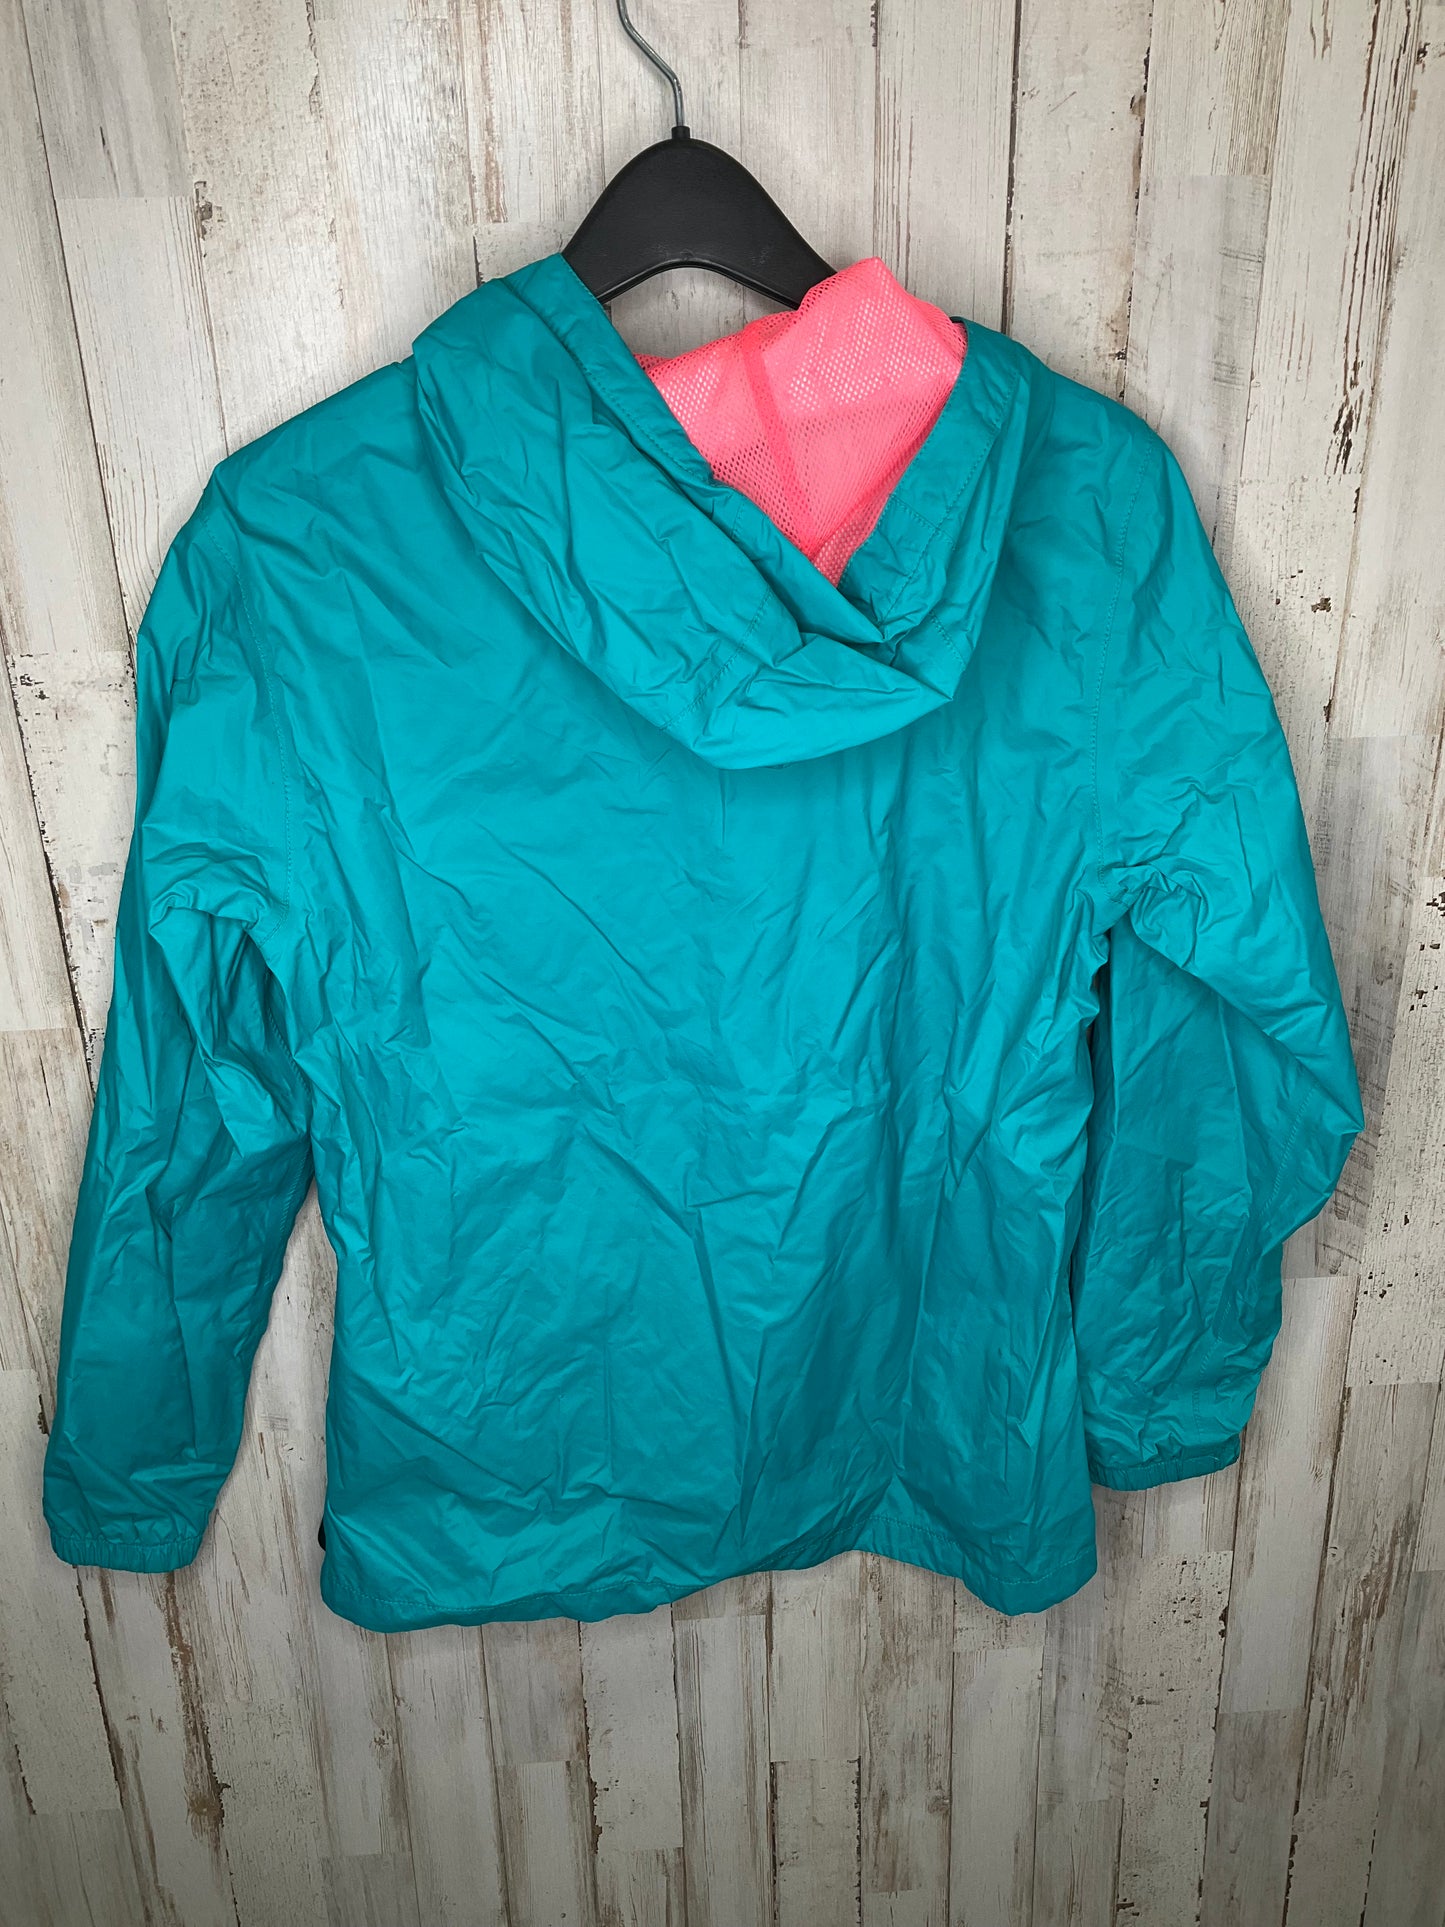 Coat Raincoat By North Face  Size: Xl